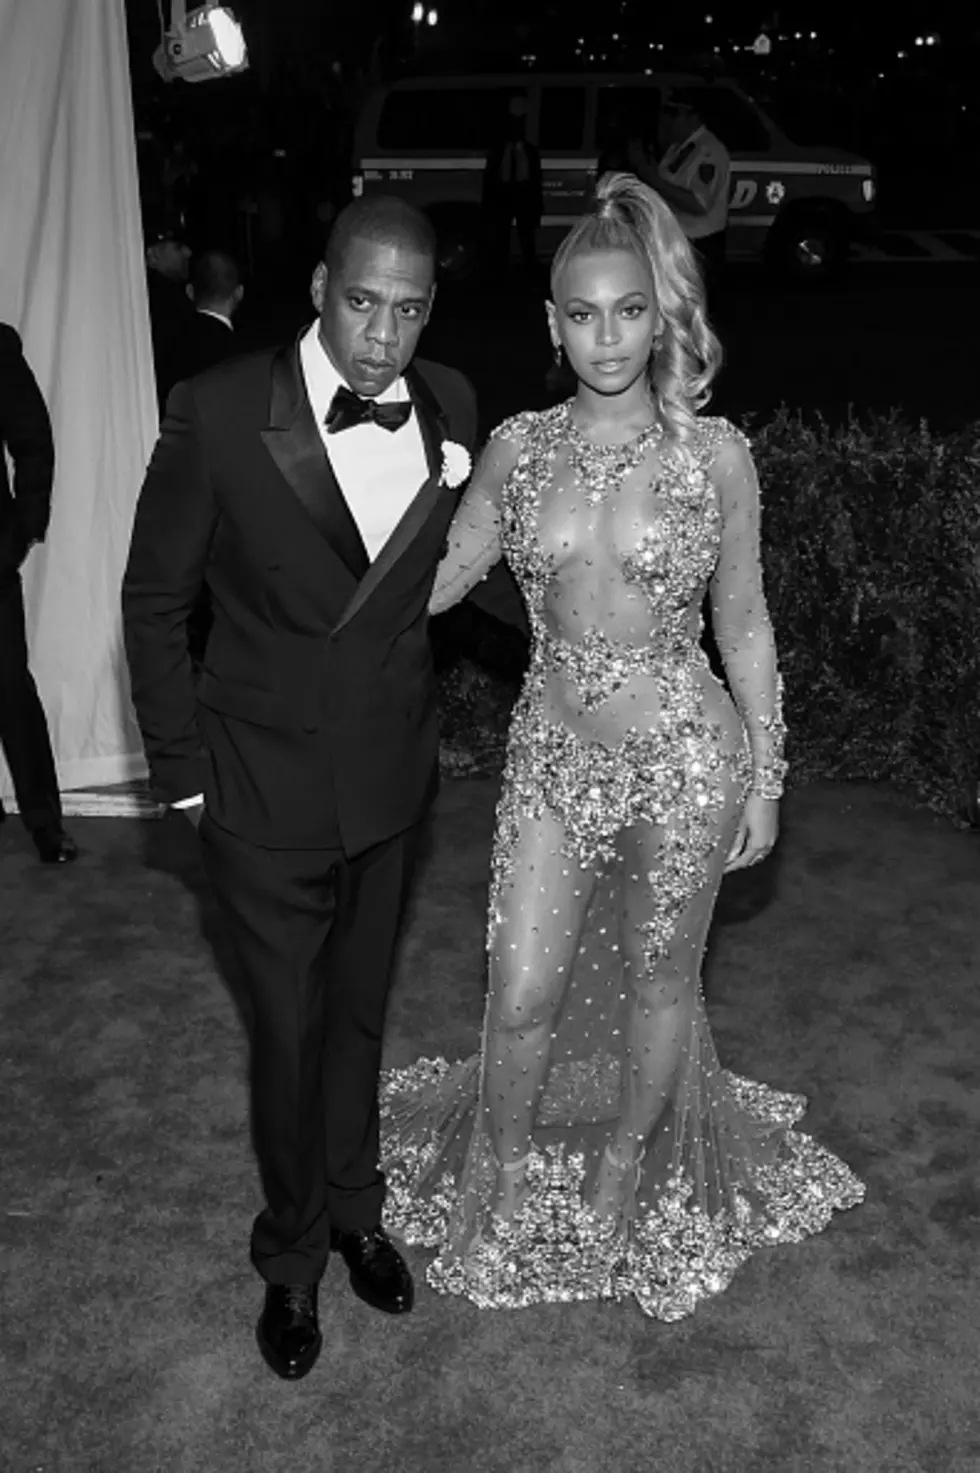 Would You Go Vegan For A Chance To Win Free Jay Z &#038; Beyonce Concert Tickets For Life?